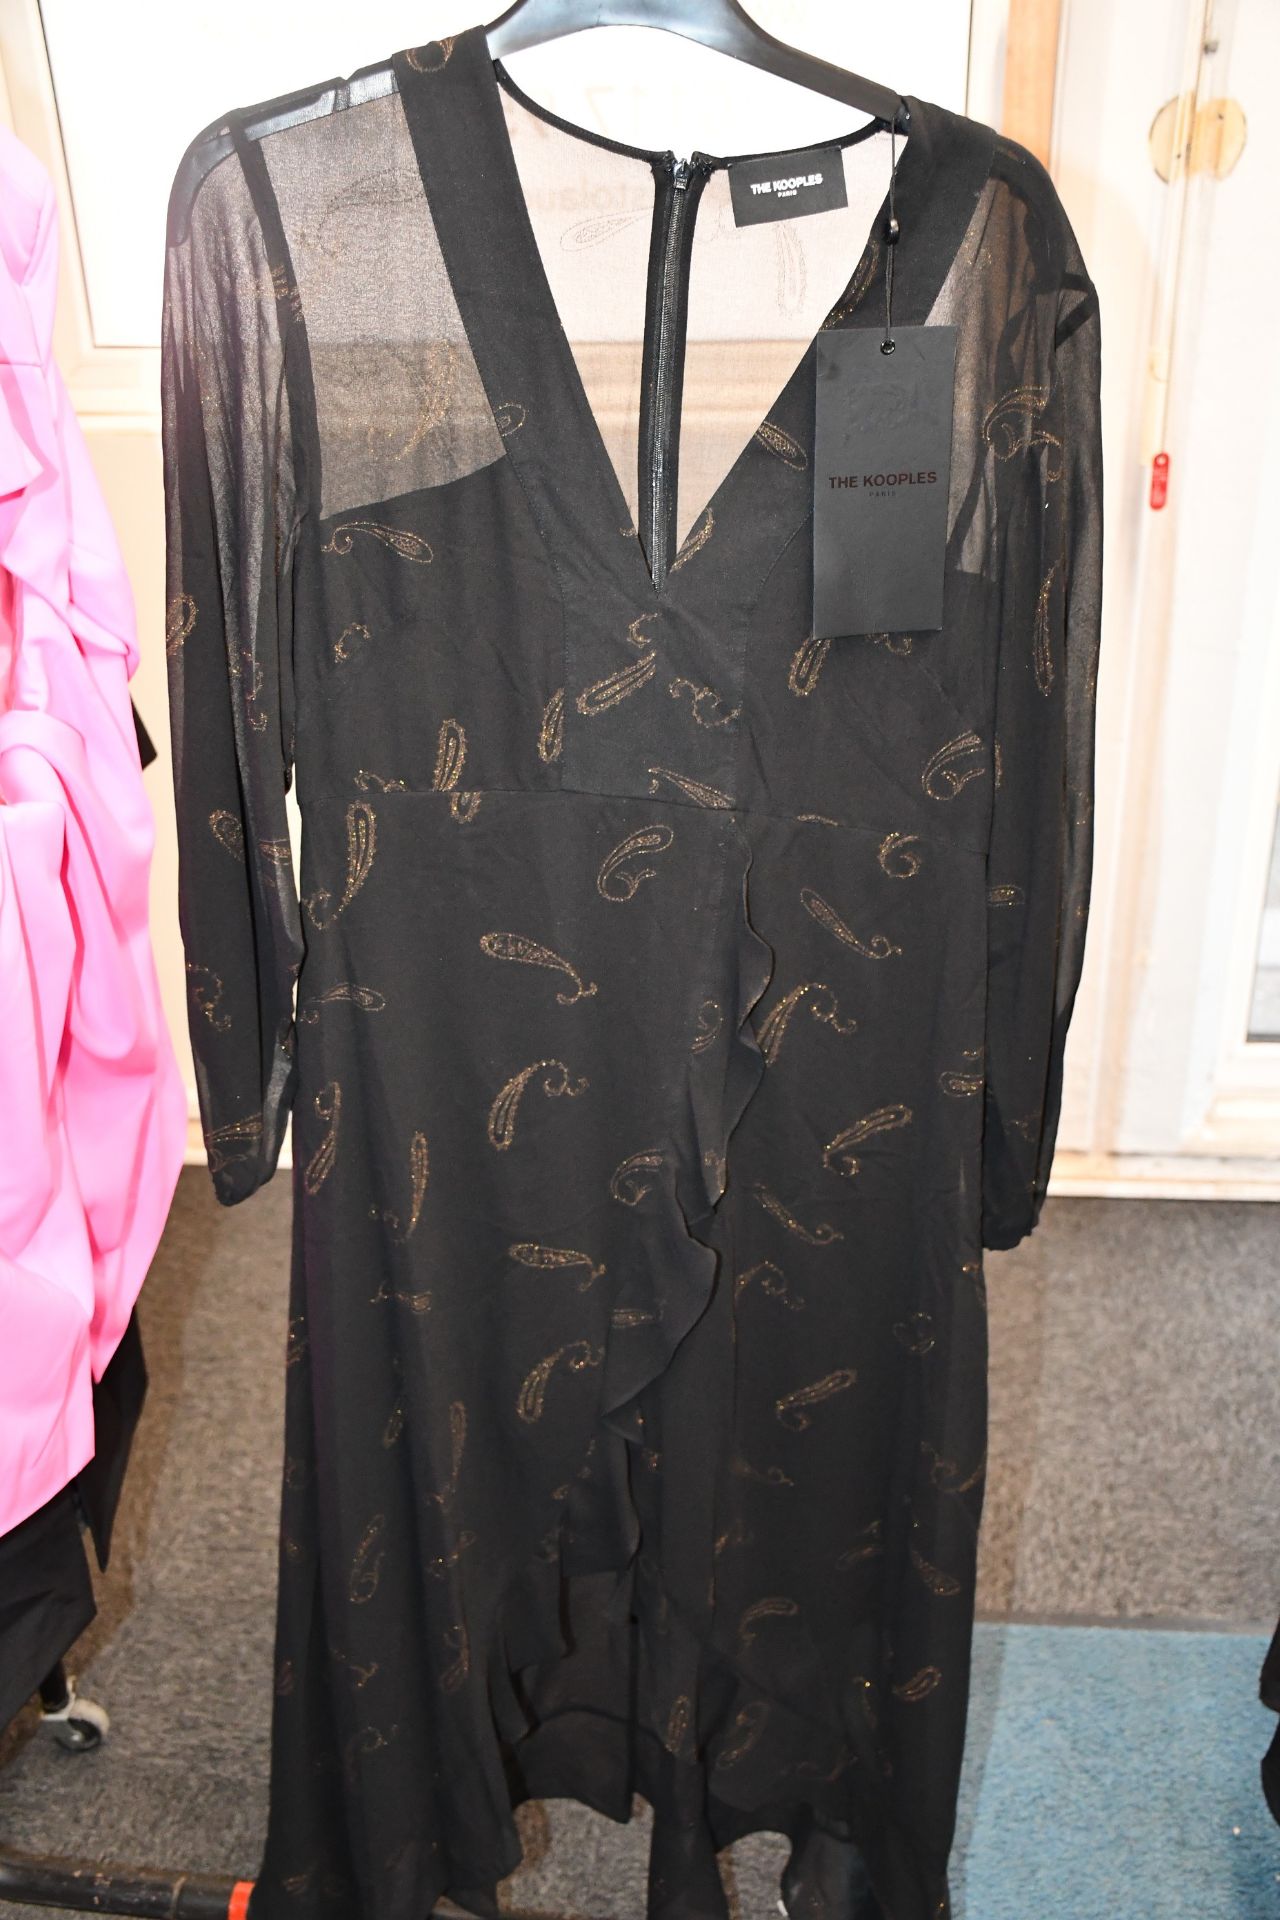 An as new The Kooples Flying Paisley dress (Size 3 - RRP £318).